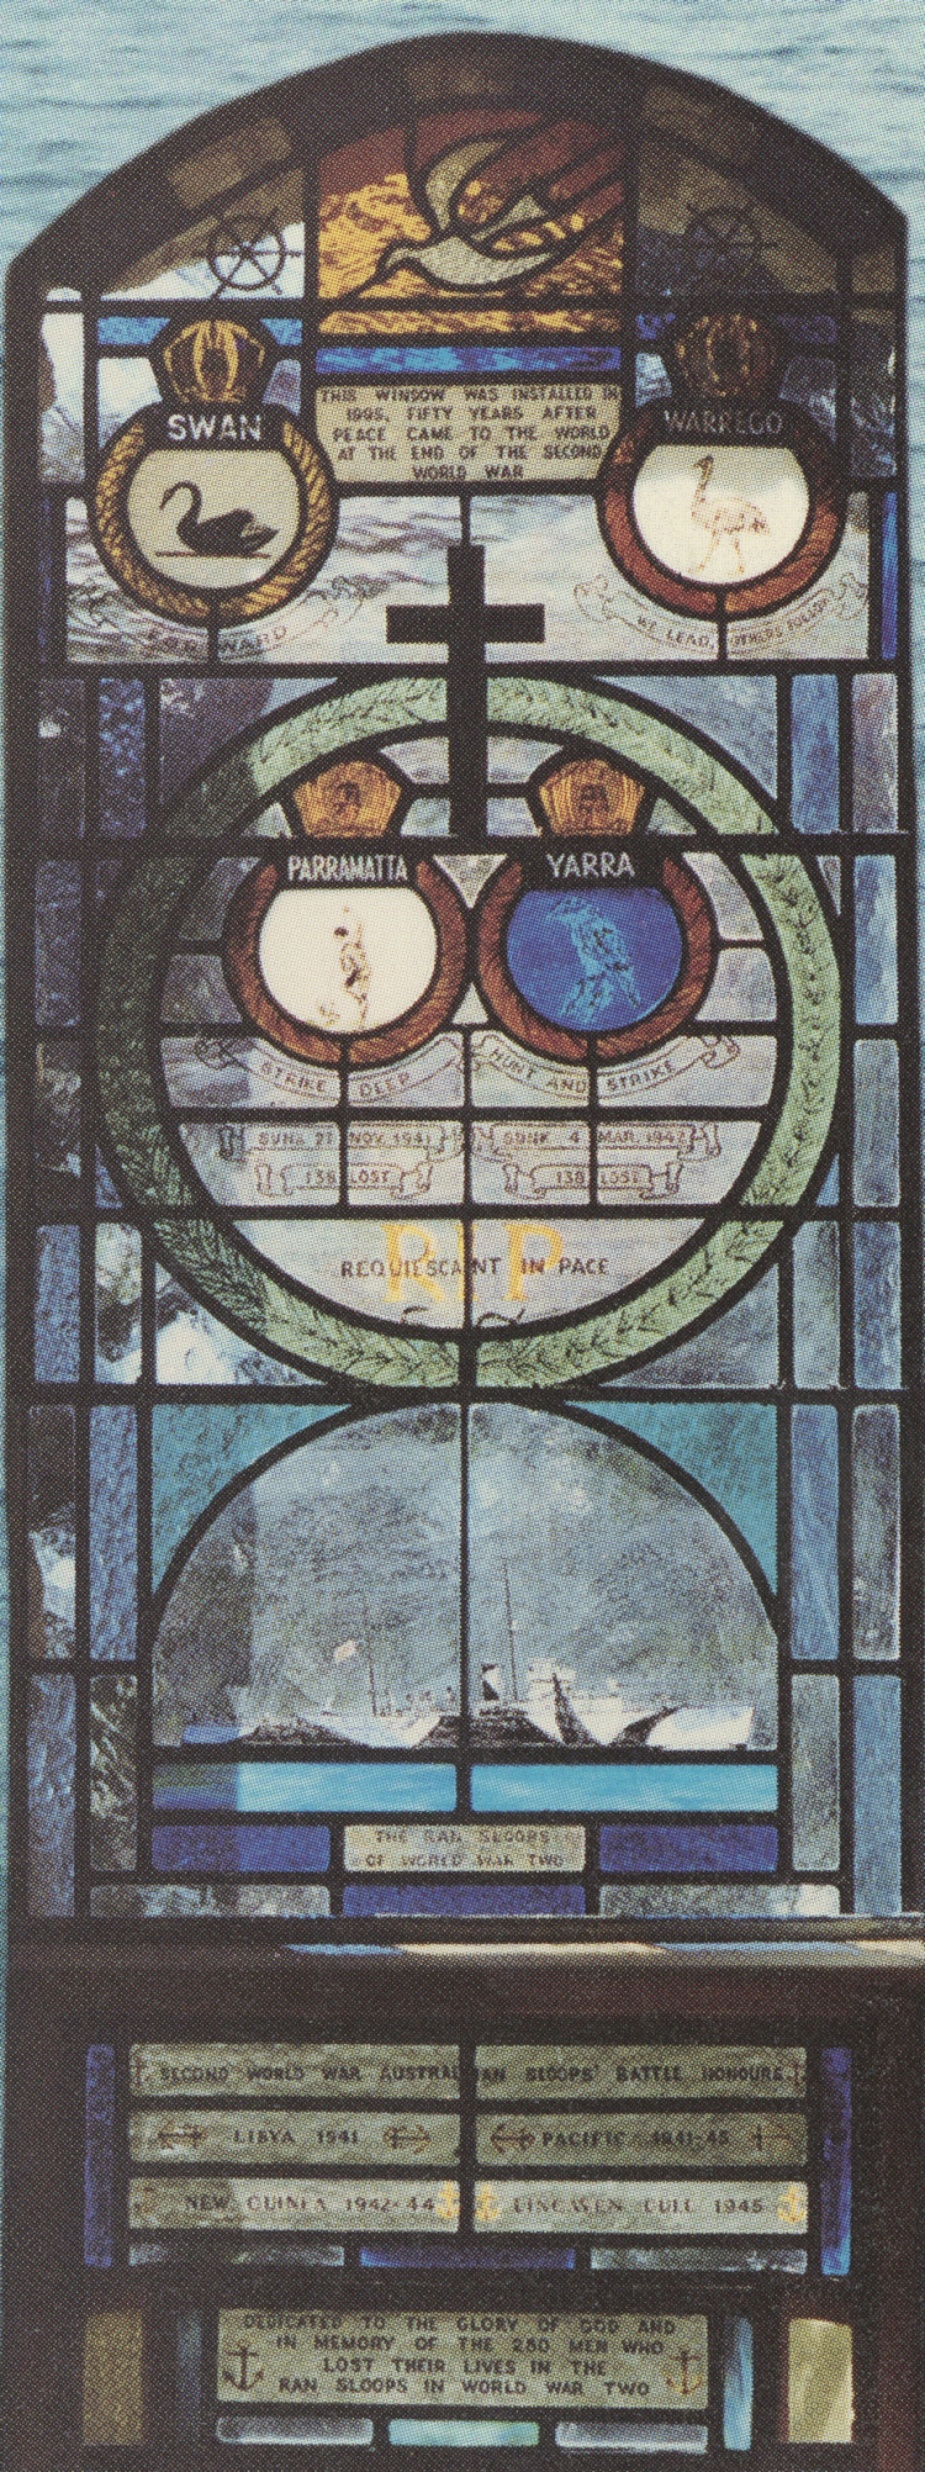 This National Memorial stained glass window was dedicated to the greater glory of God on 24 September 1995 in St Mark's Chapel HMAS Cerberus. The window was designed and crafted by Commodore Dacre Smyth, AO RAN (rtd)